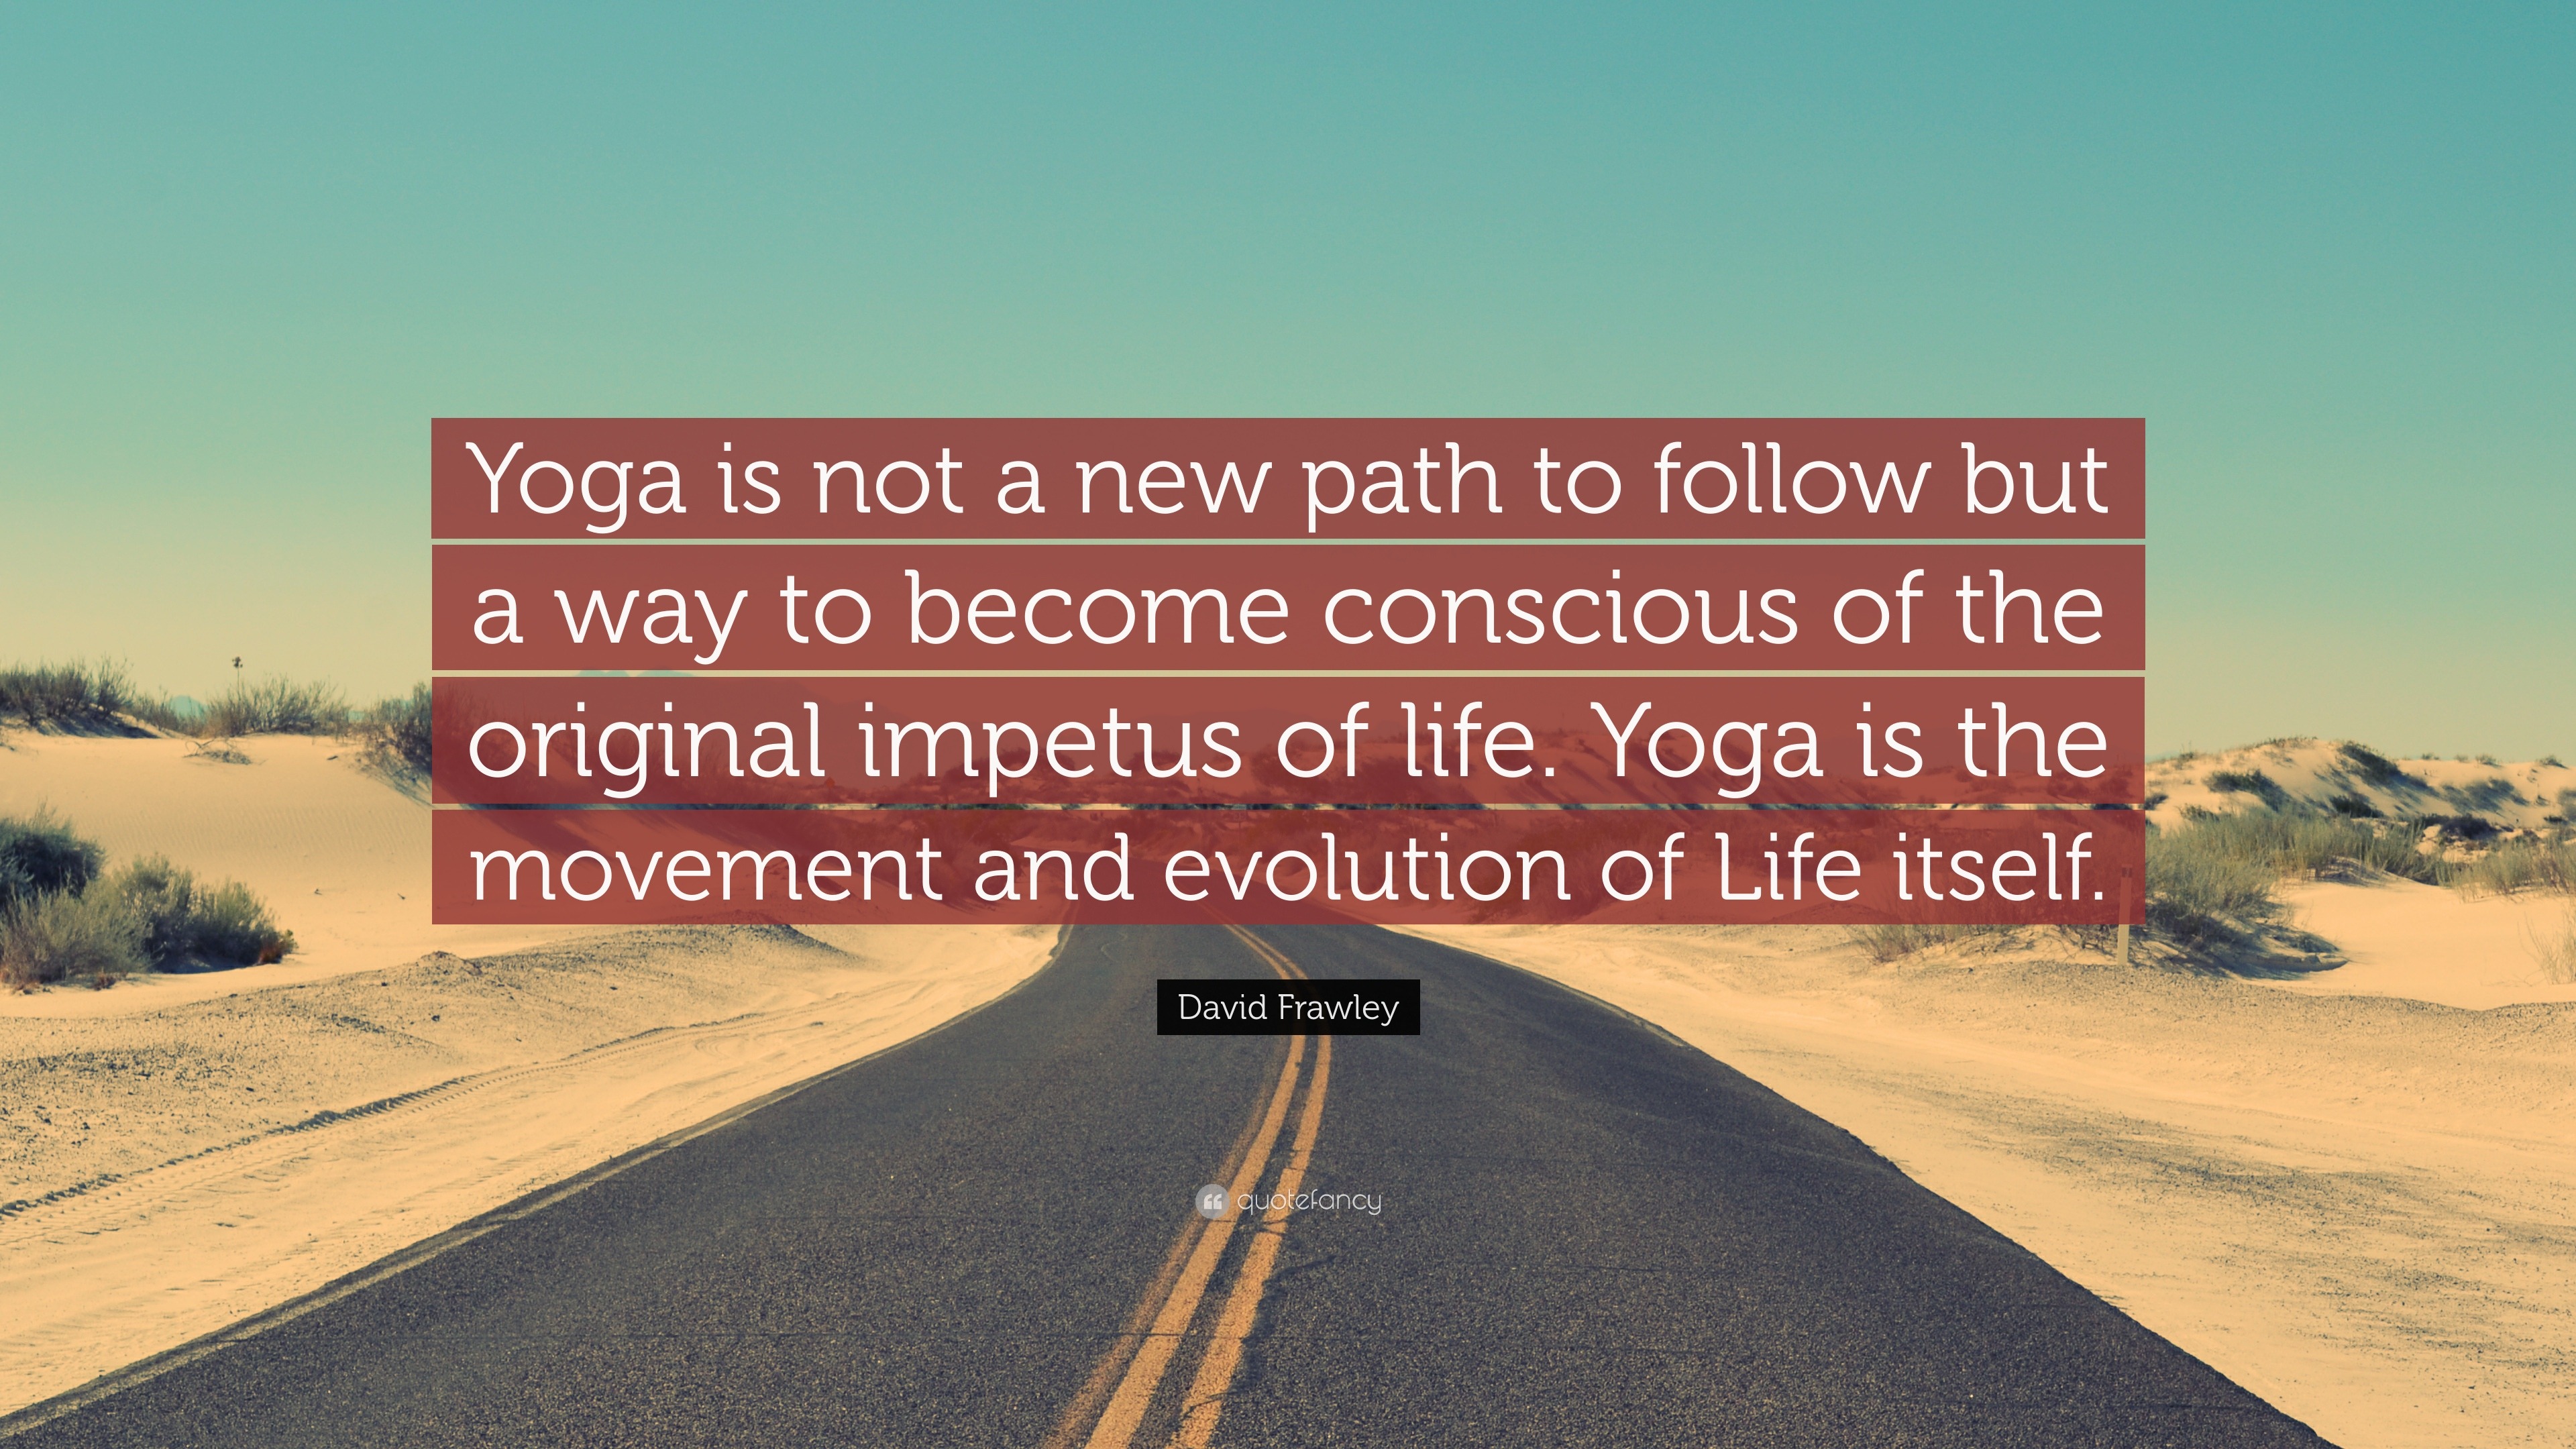 David Frawley Quote “Yoga is not a new path to follow but a way